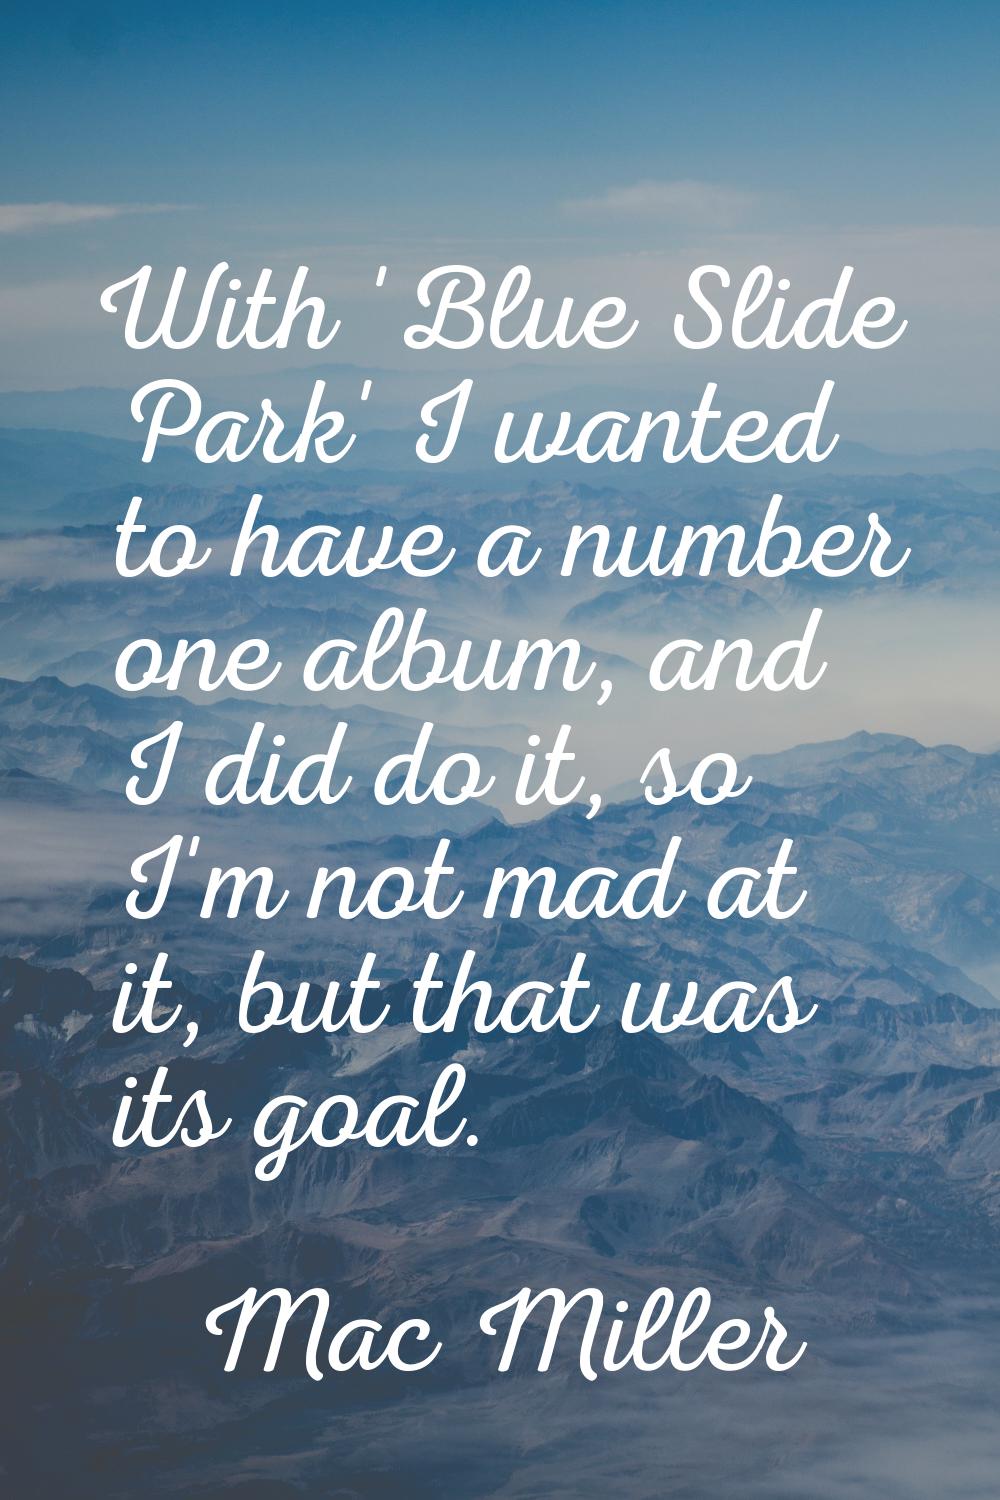 With 'Blue Slide Park' I wanted to have a number one album, and I did do it, so I'm not mad at it, 